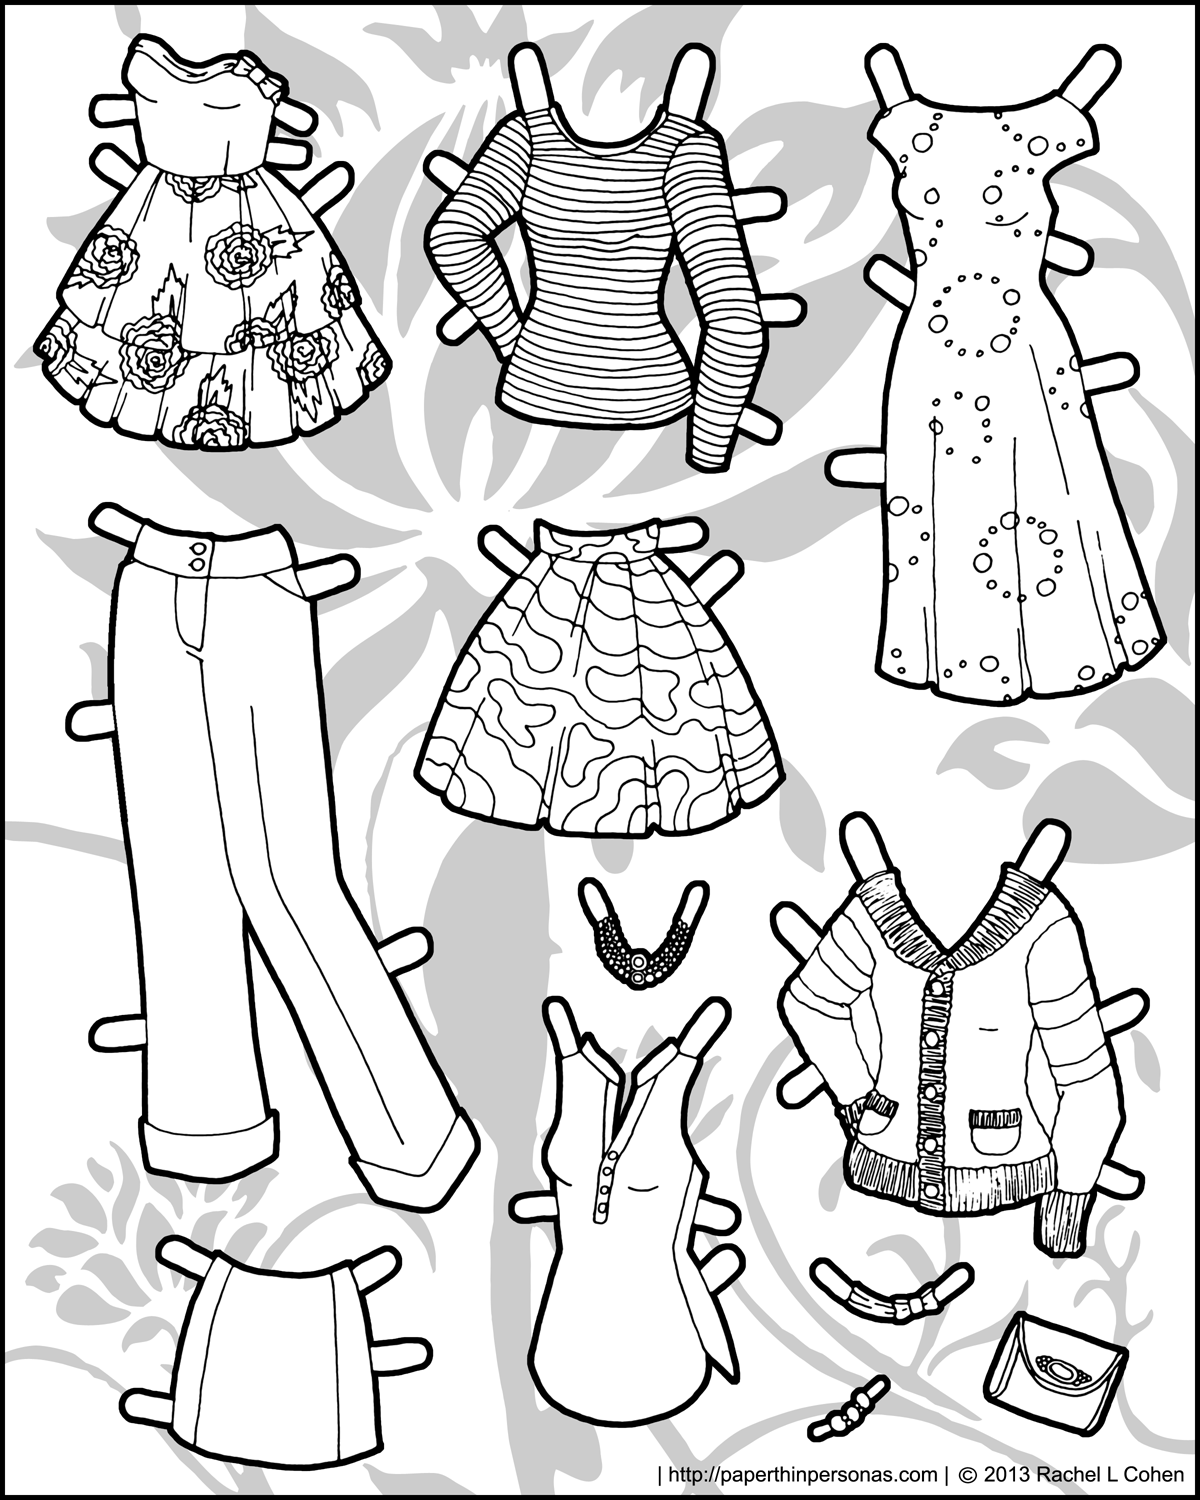 paper thin personas in 2021 paper dolls clothing paper dolls paper dolls book